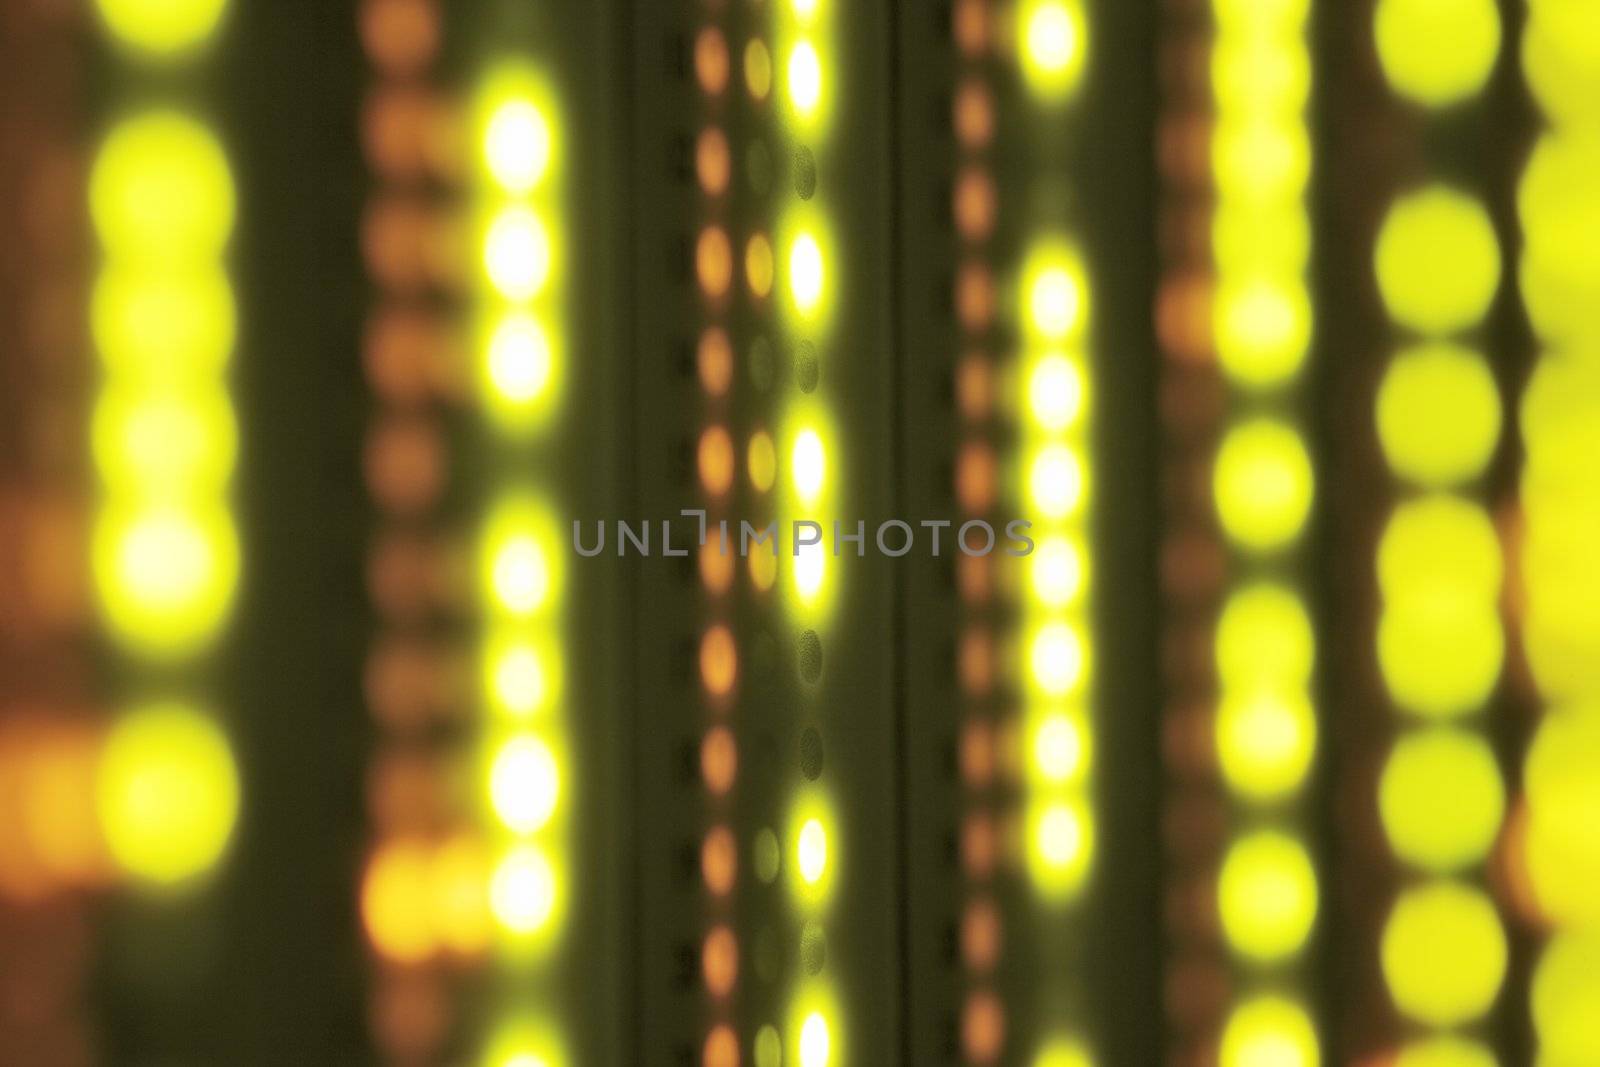 Abstract image of blinking led lights in a server room.